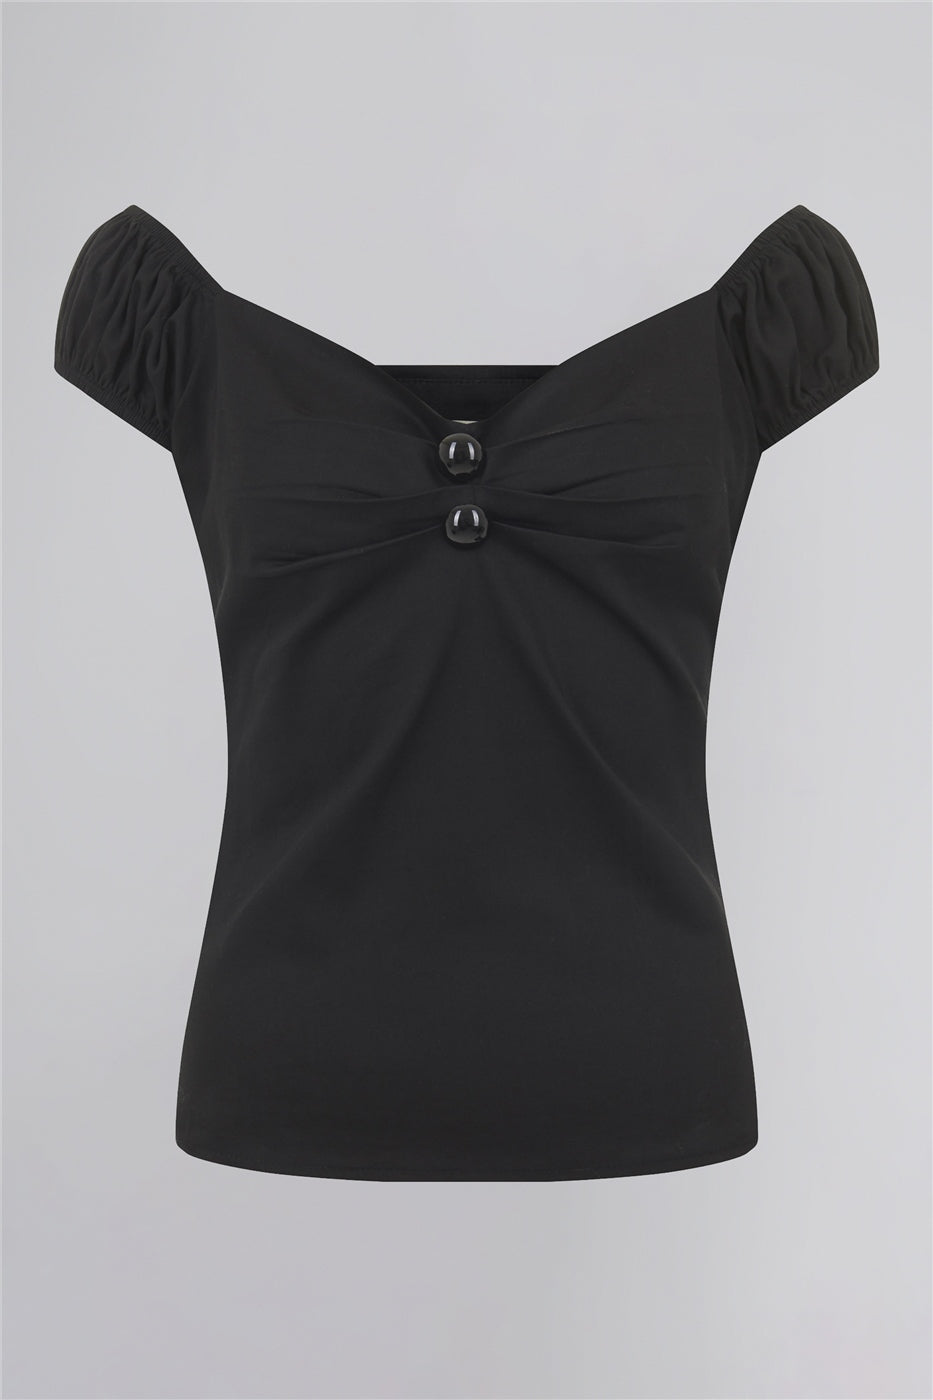 The Dolores classic 50s style top in black by Collectif